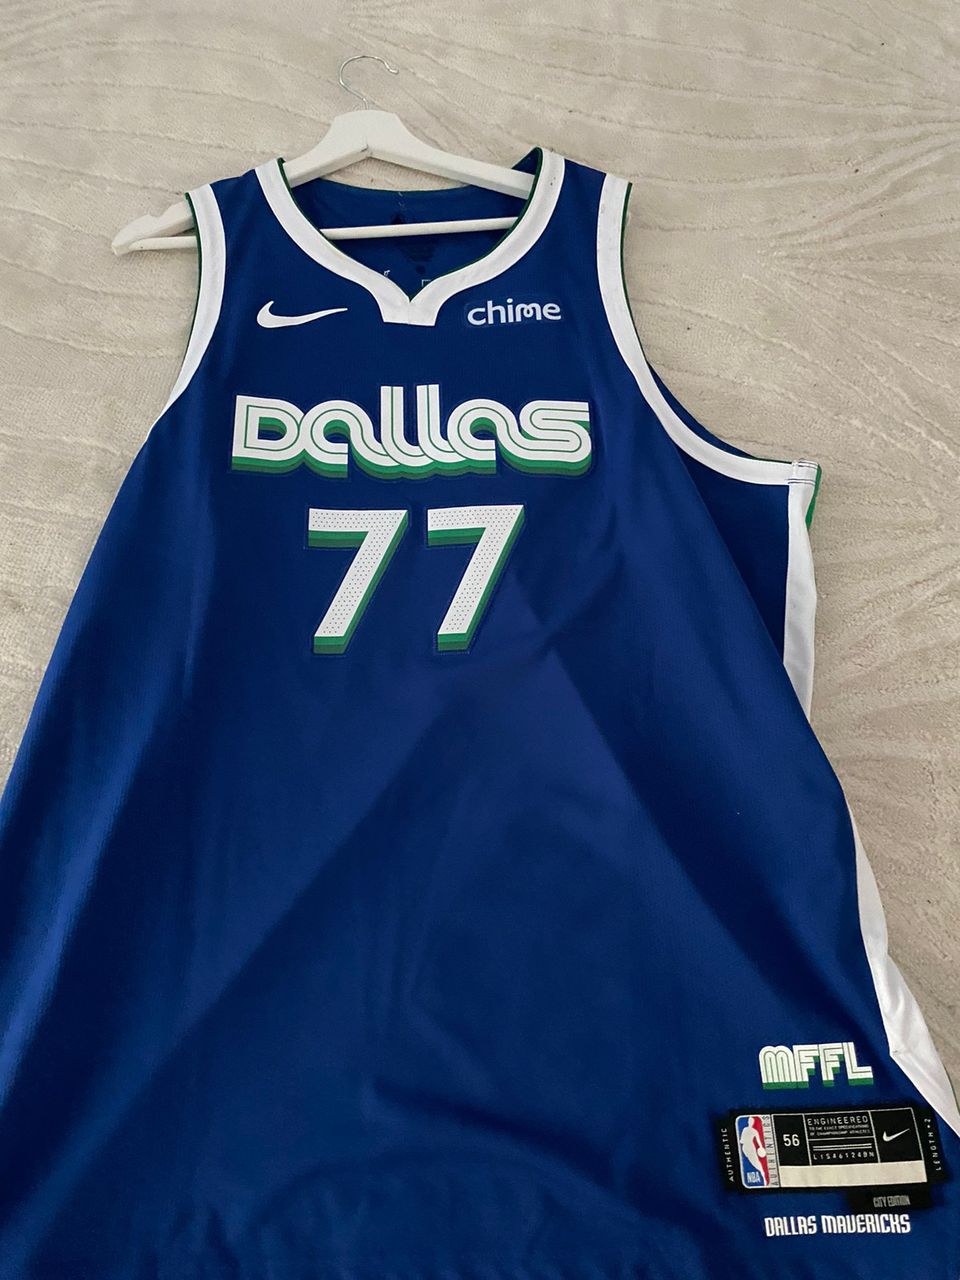 Luka doncic authentic city jersey